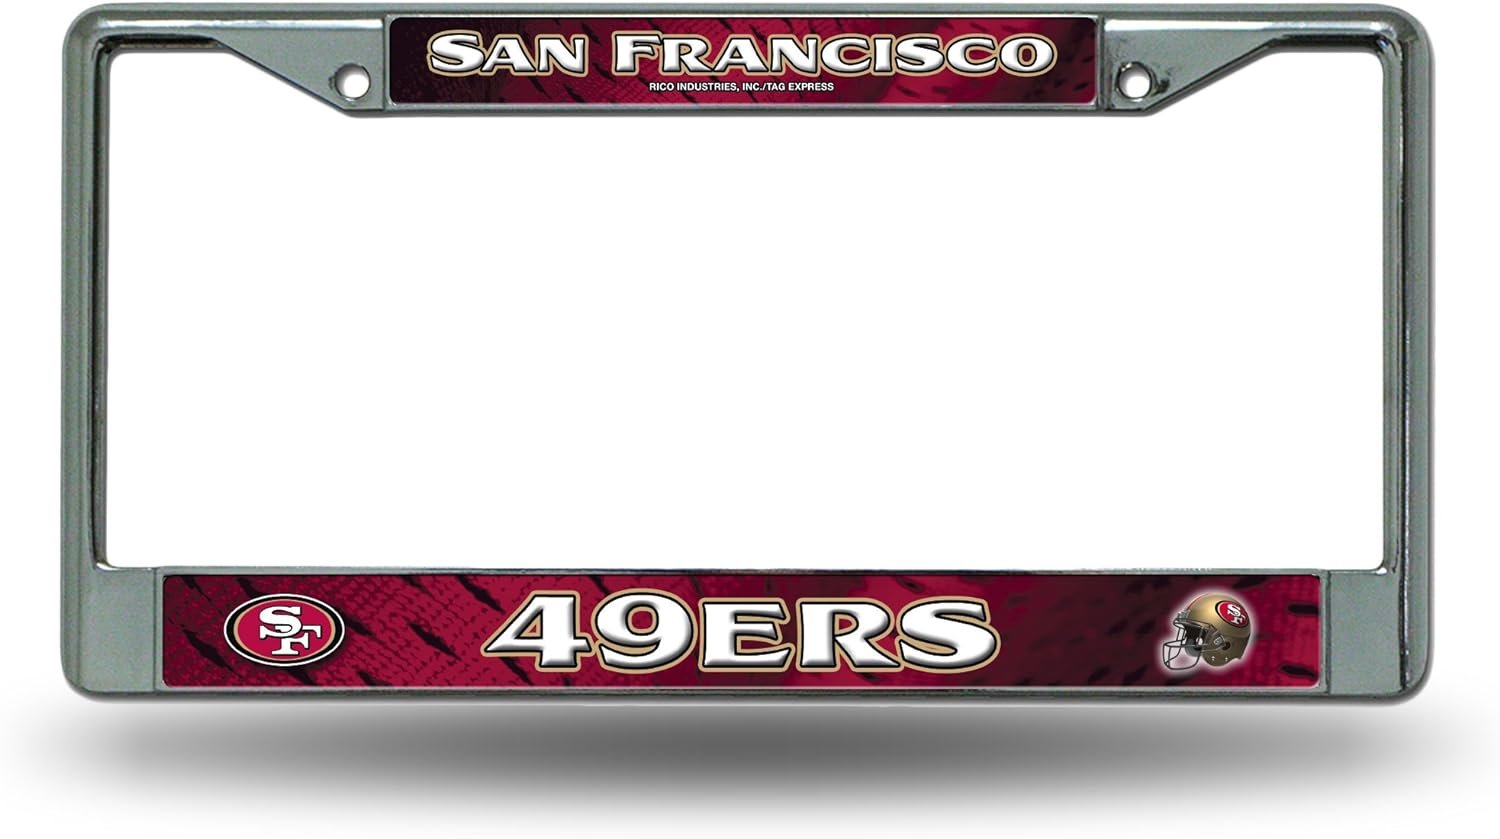 San Francisco 49ers Chrome Metal License Plate Frame Tag Cover, Jersey Style, 12x6 Inch